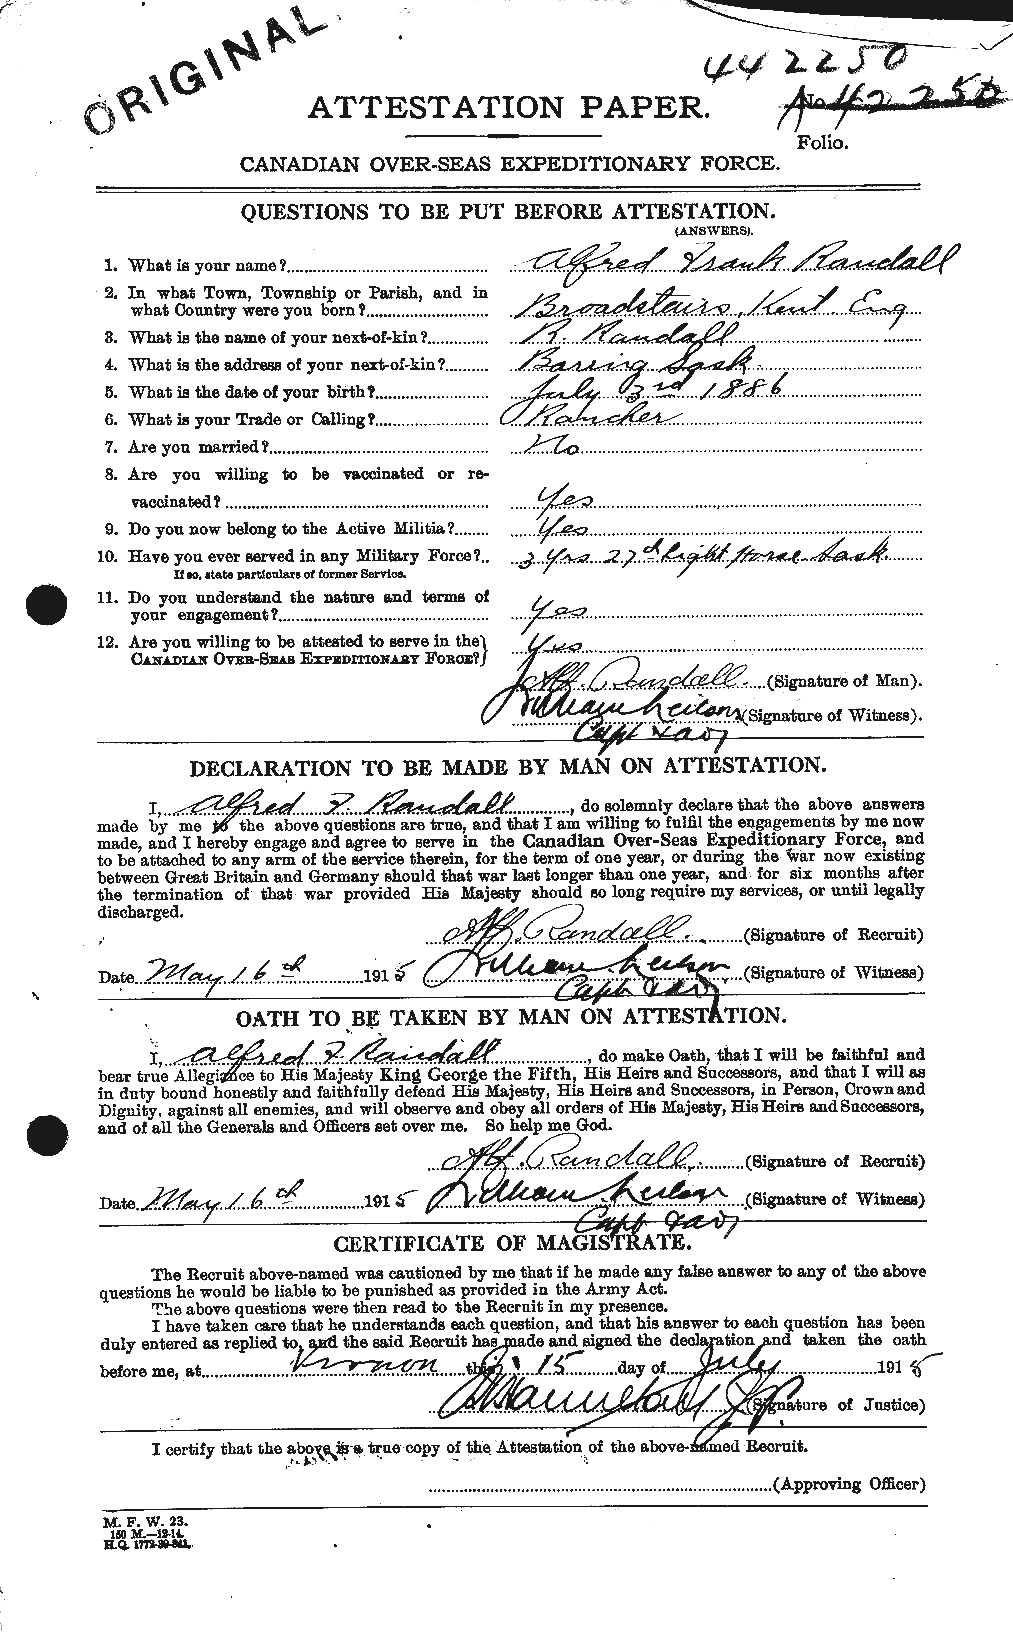 Personnel Records of the First World War - CEF 593357a